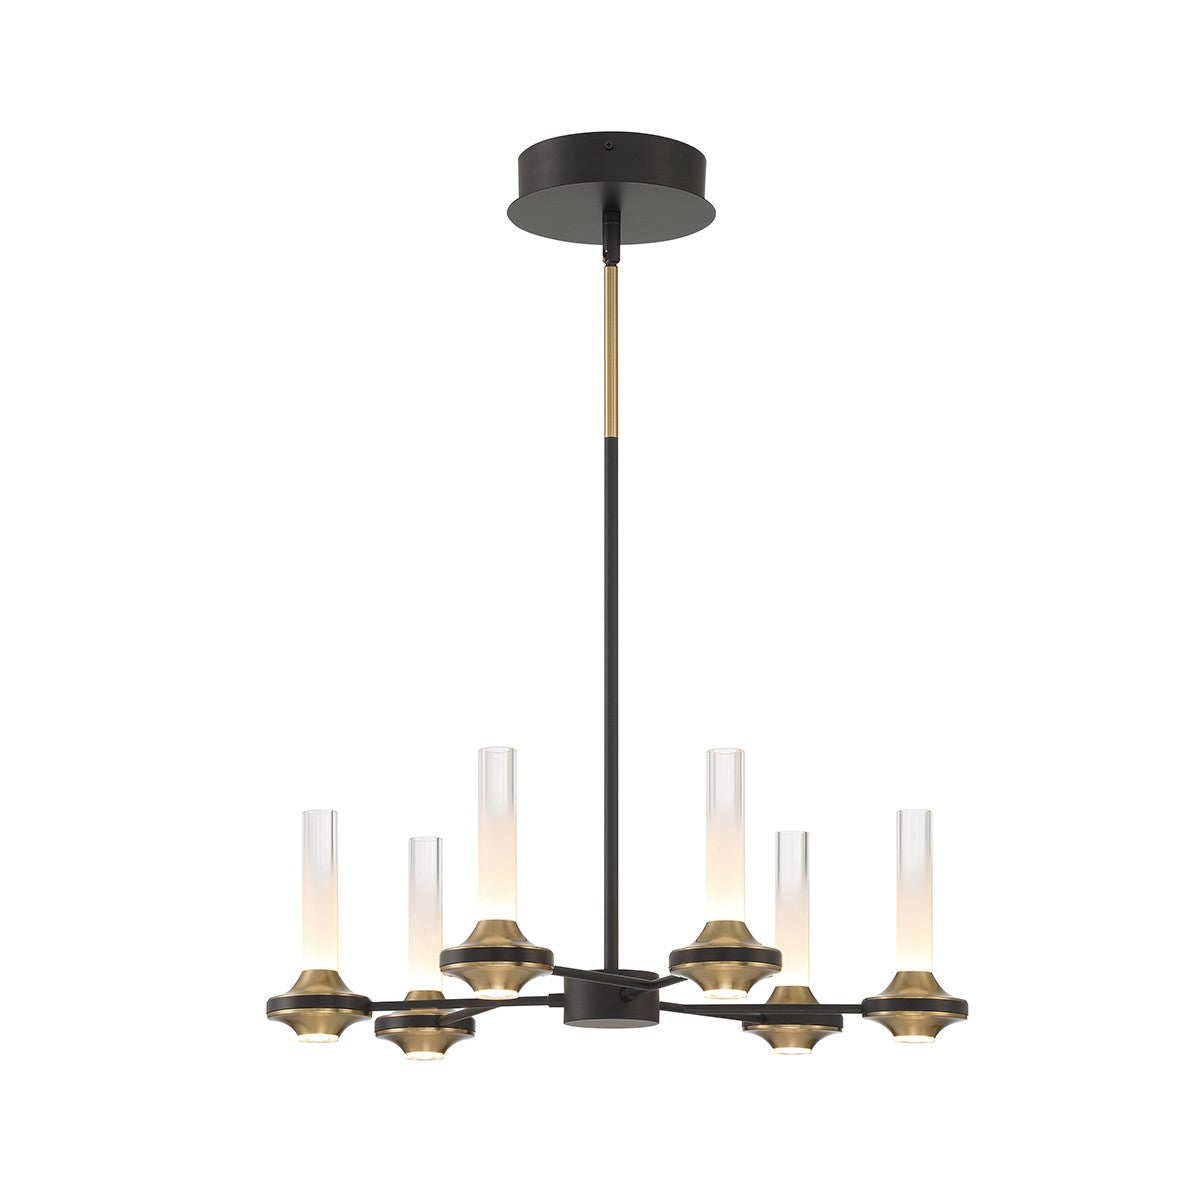 Eurofase Canada - 45712-012 - LED Chandelier - Torcia - Black and Brass